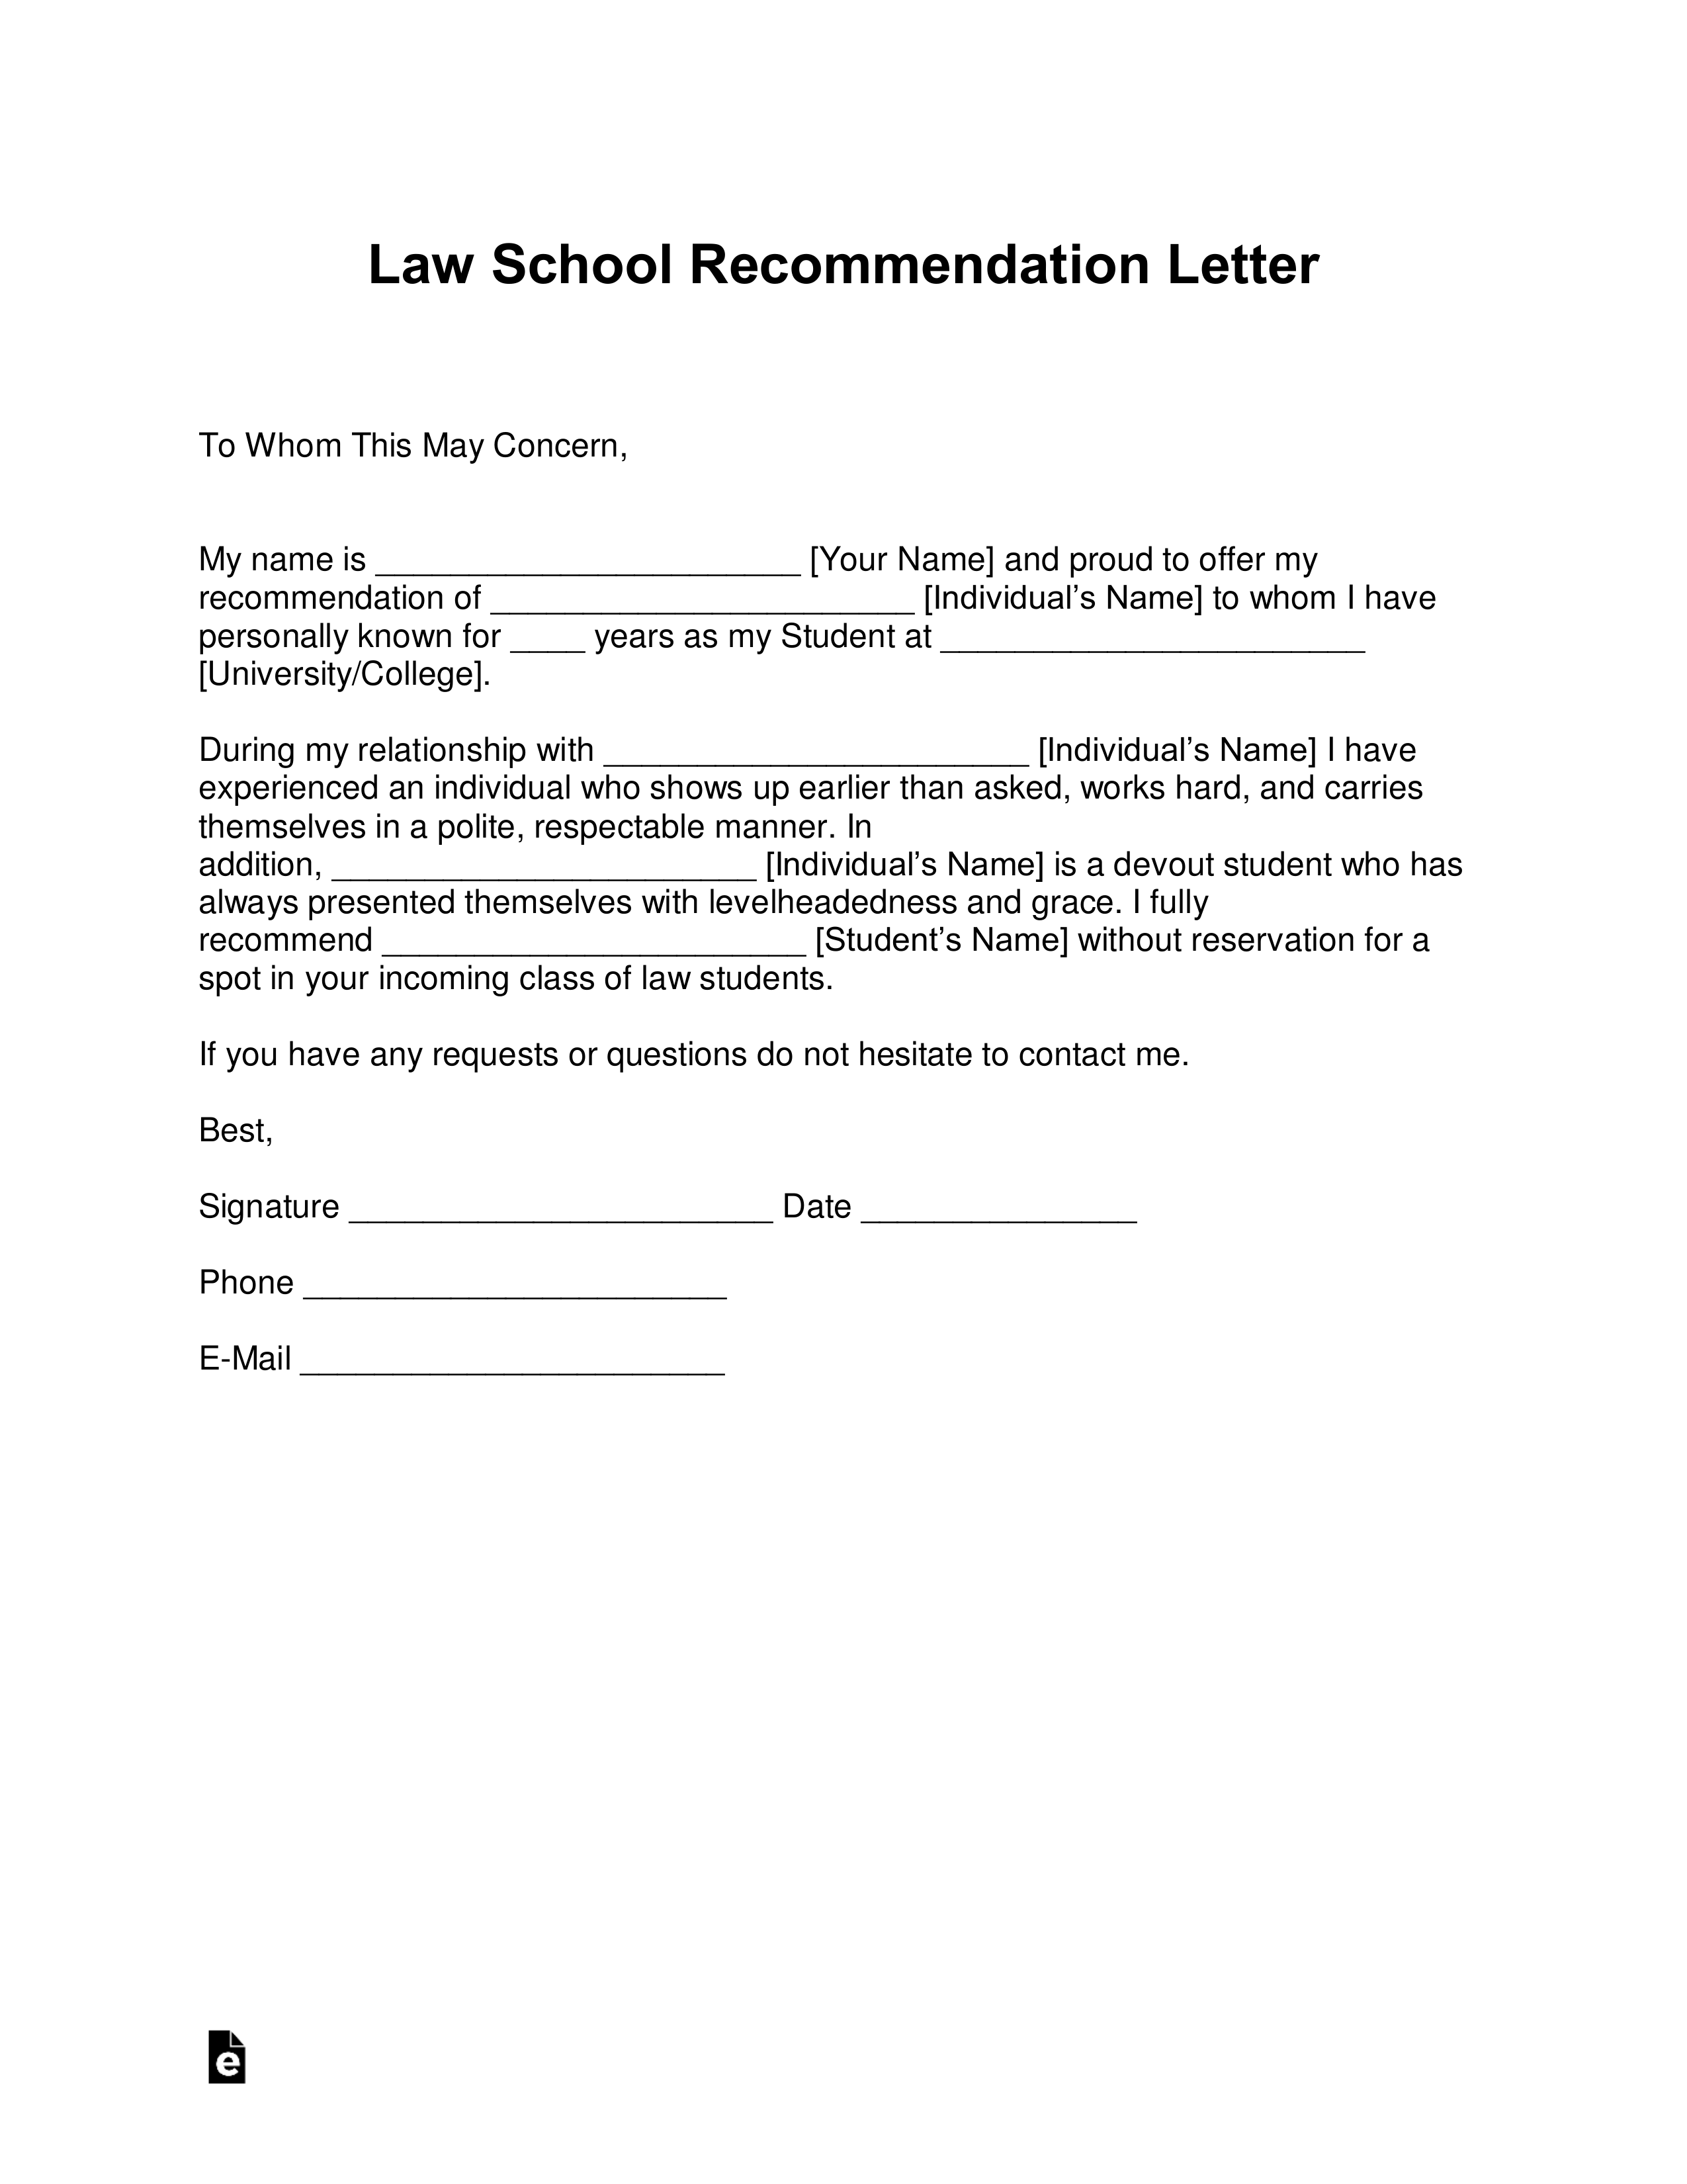 Generic Letter Of Recommendation For Student from eforms.com